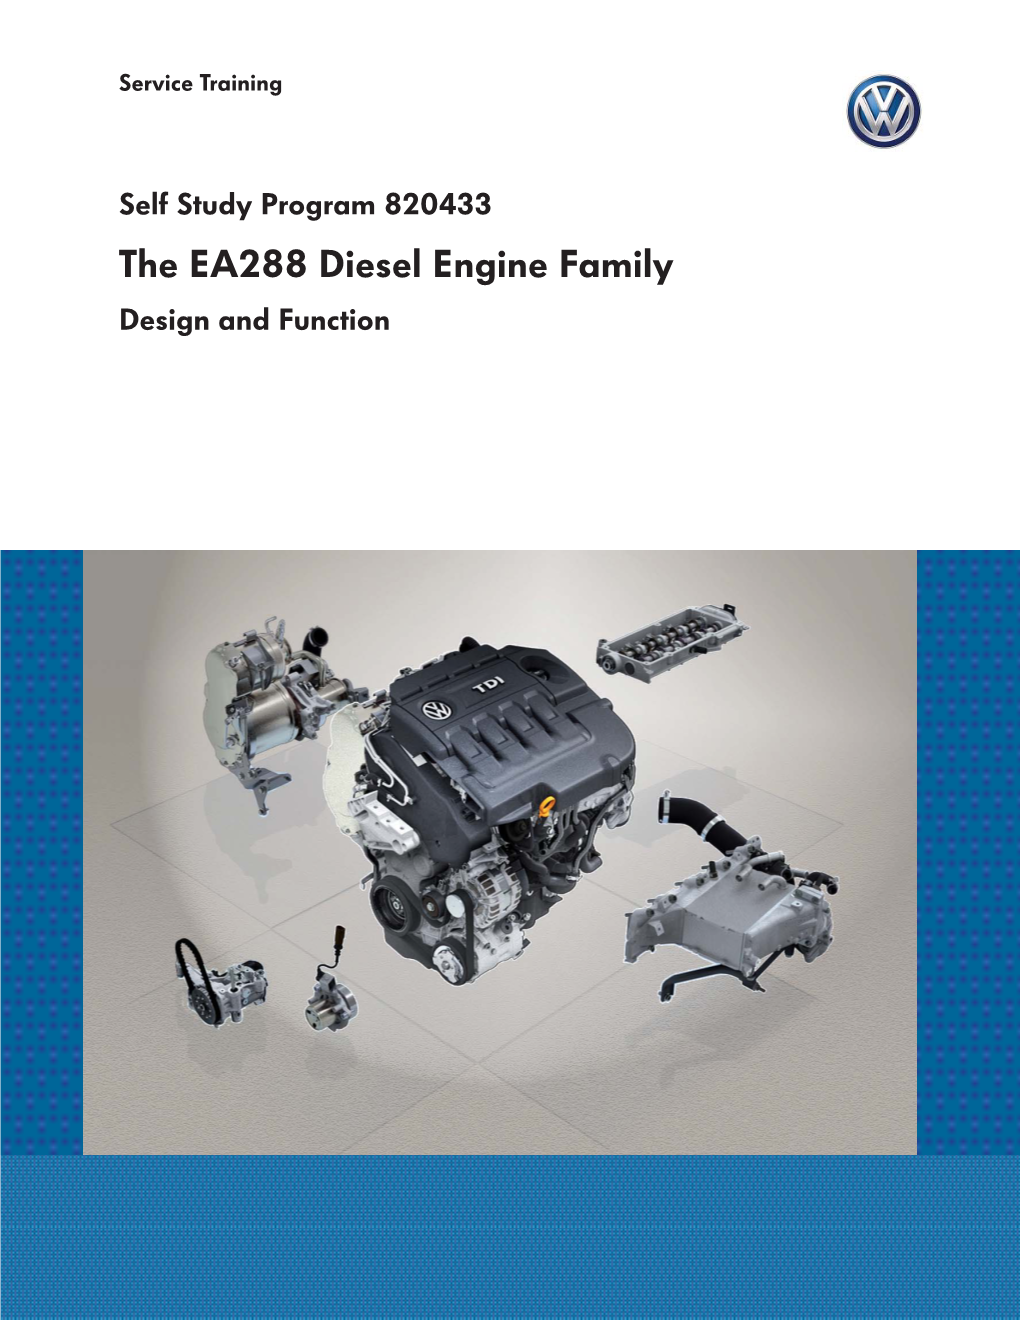 The EA288 Diesel Engine Family Design and Function Volkswagen Group of America, Inc